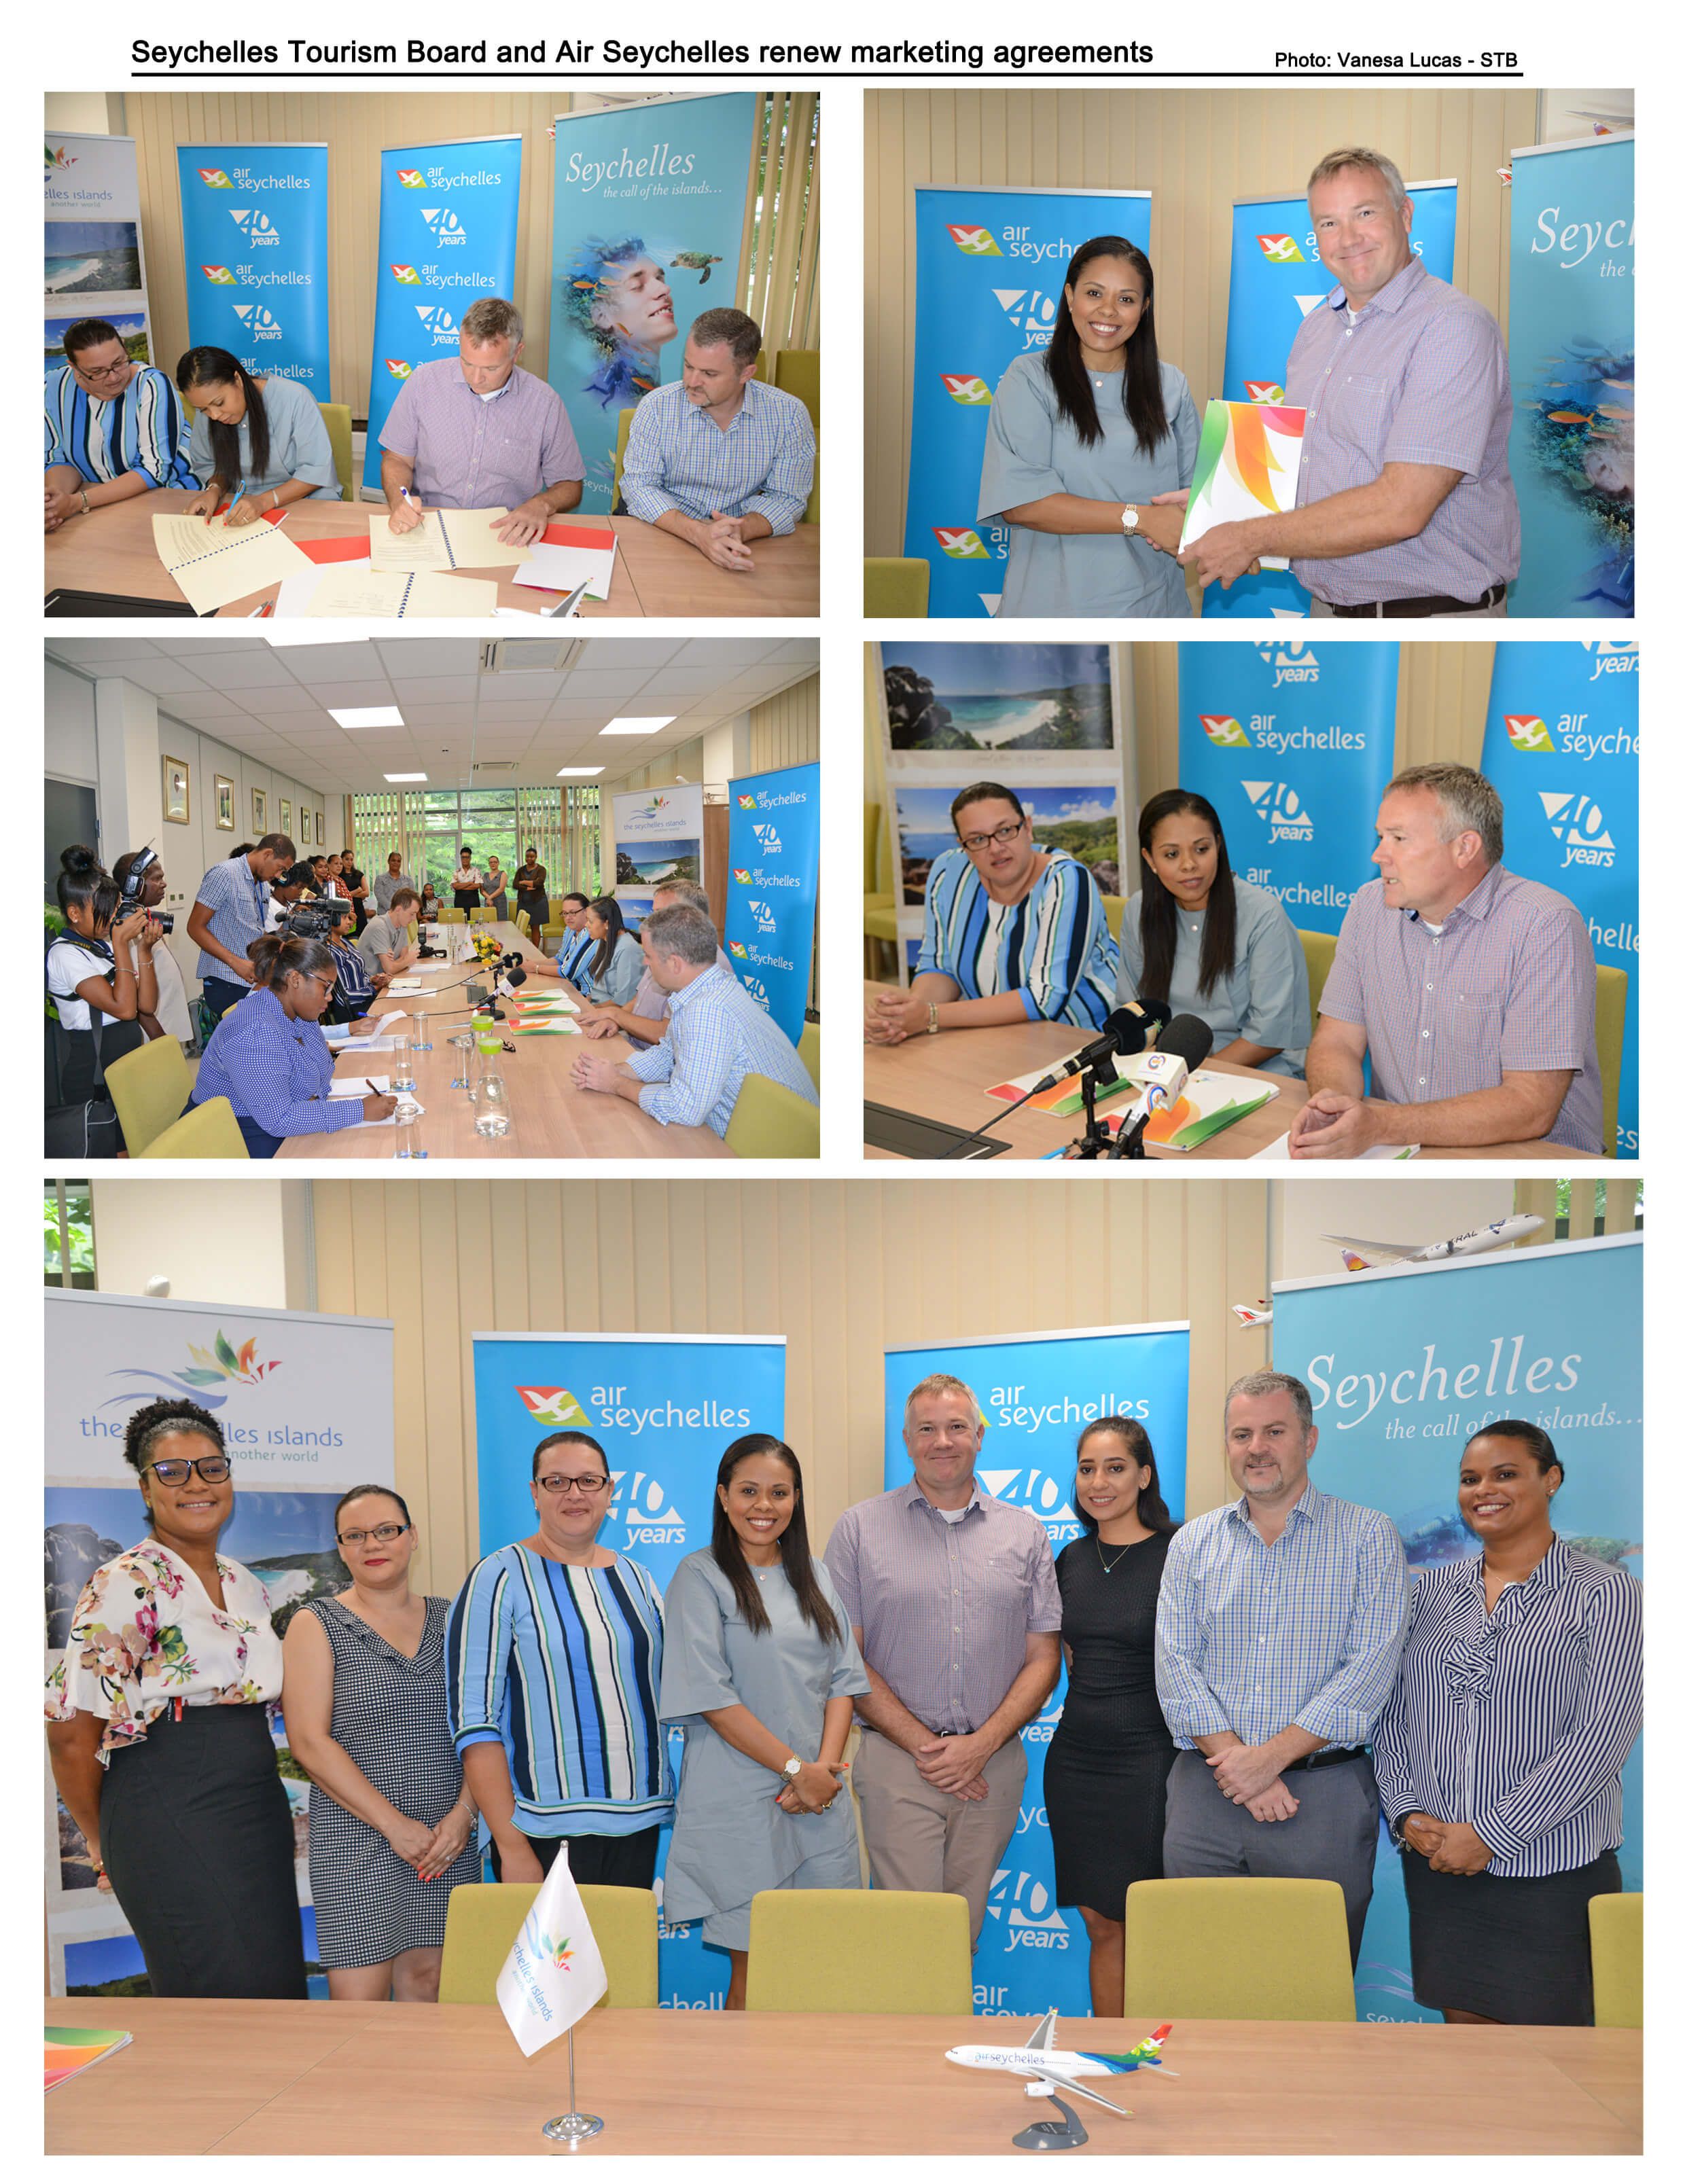 seychelles-tourism-board-and-air-seychelles-renew-marketing-agreements